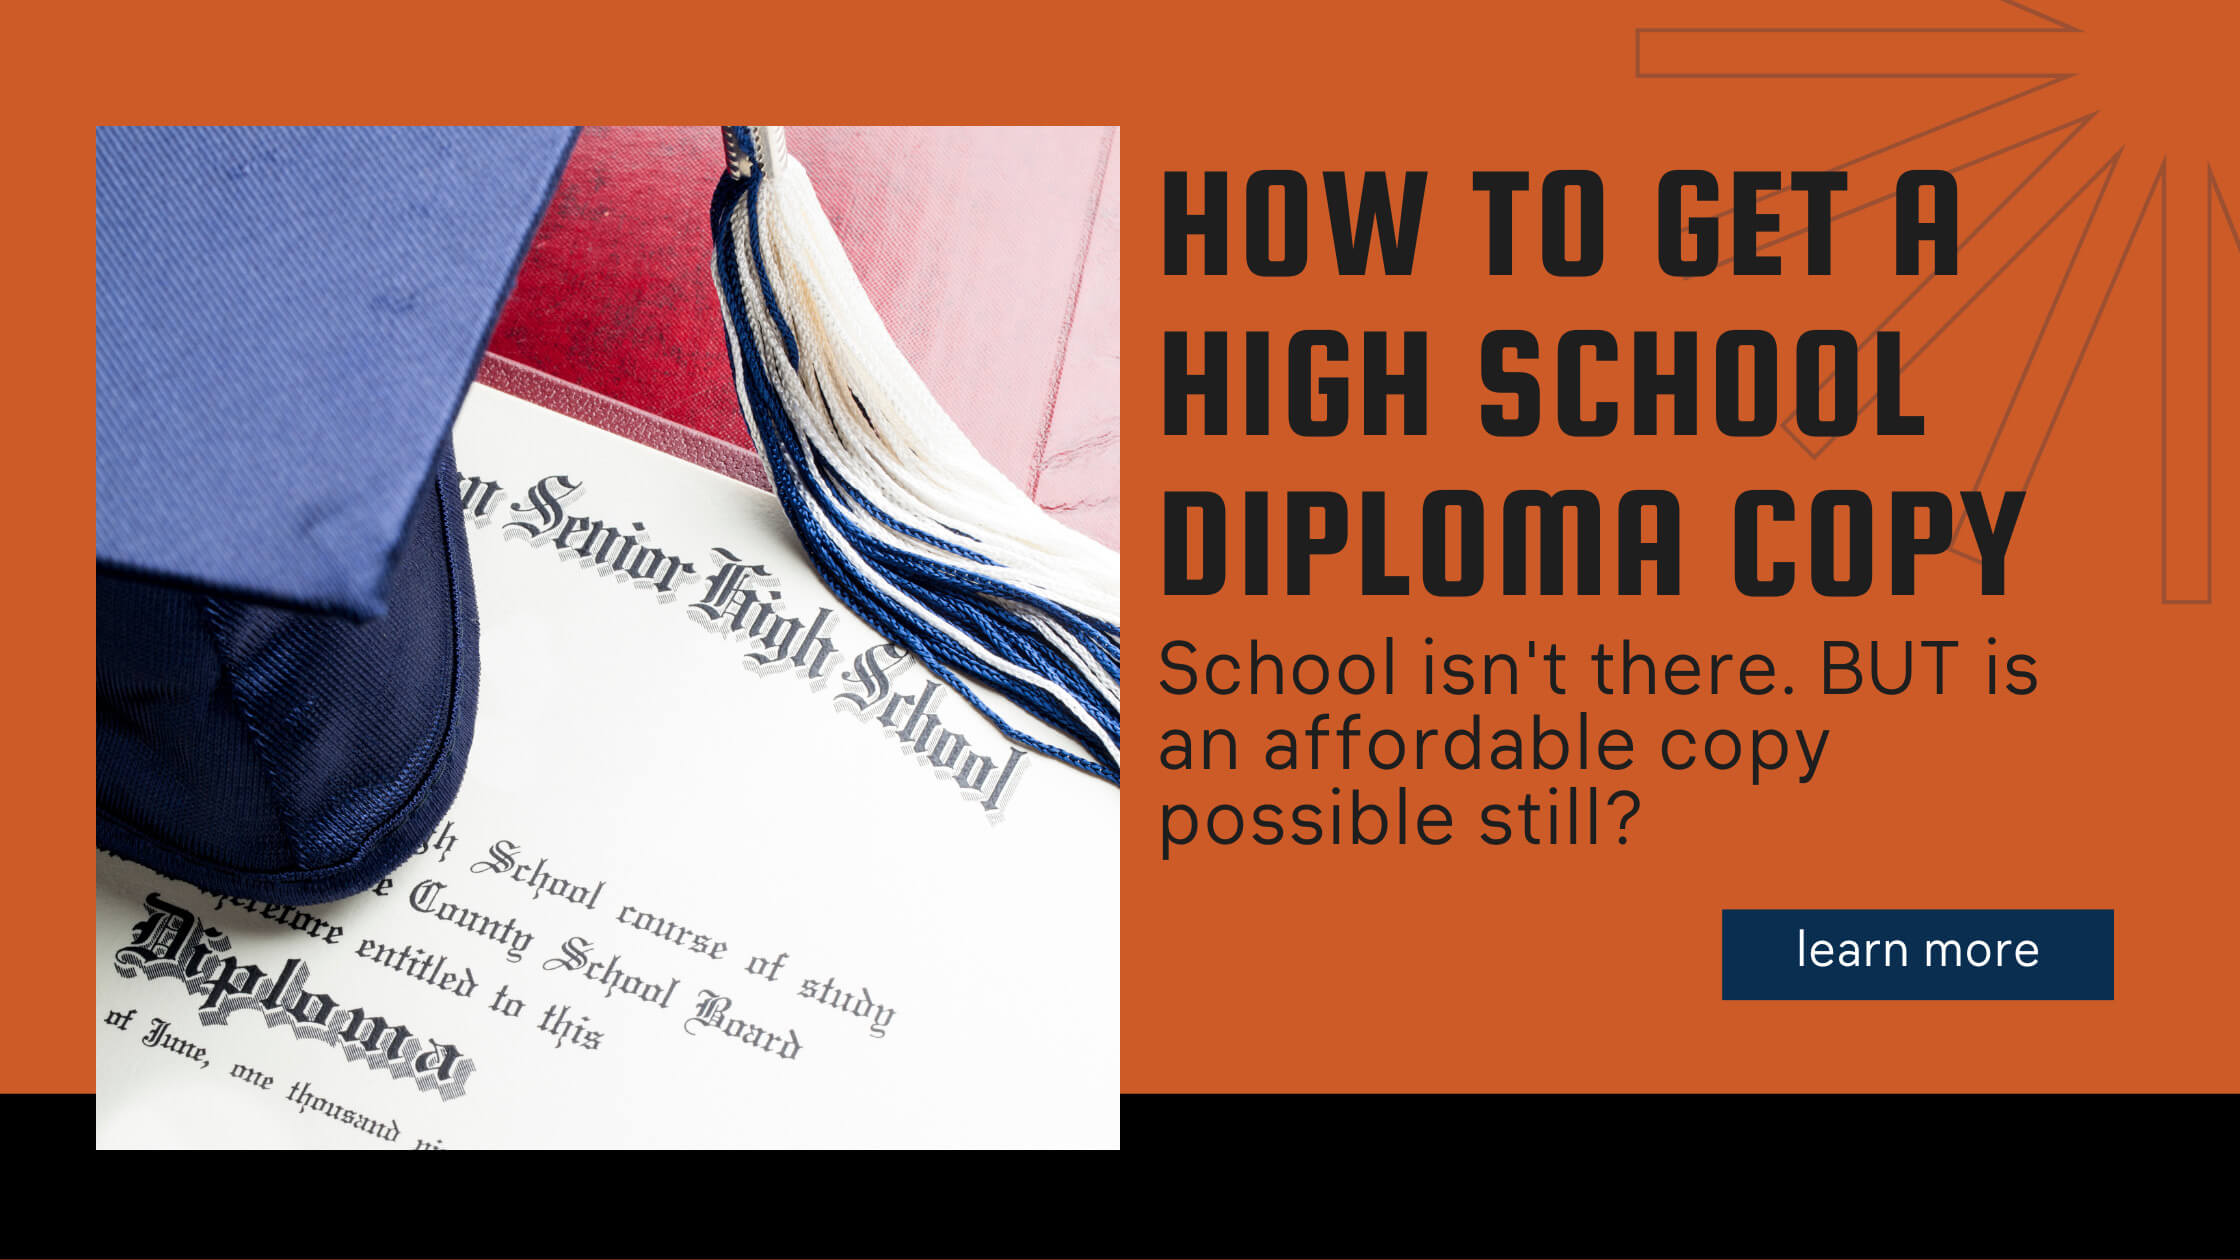 Affordable and Easy Copy of High School Diploma